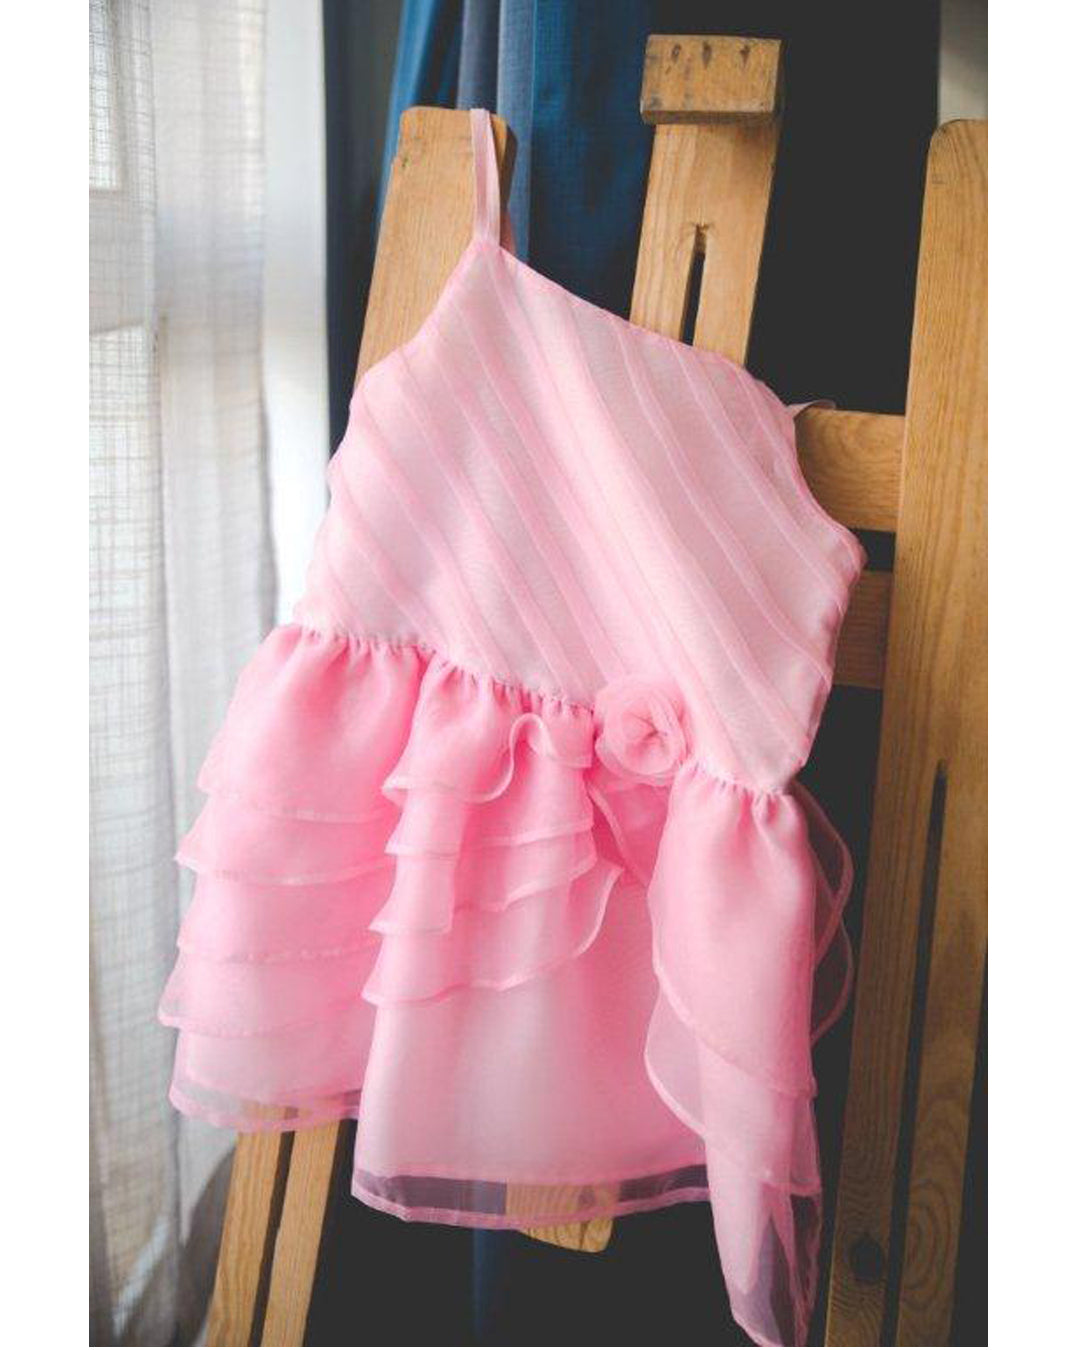 CANDY FLOSS PINK STRAPPY BIRTHDAY DRESS